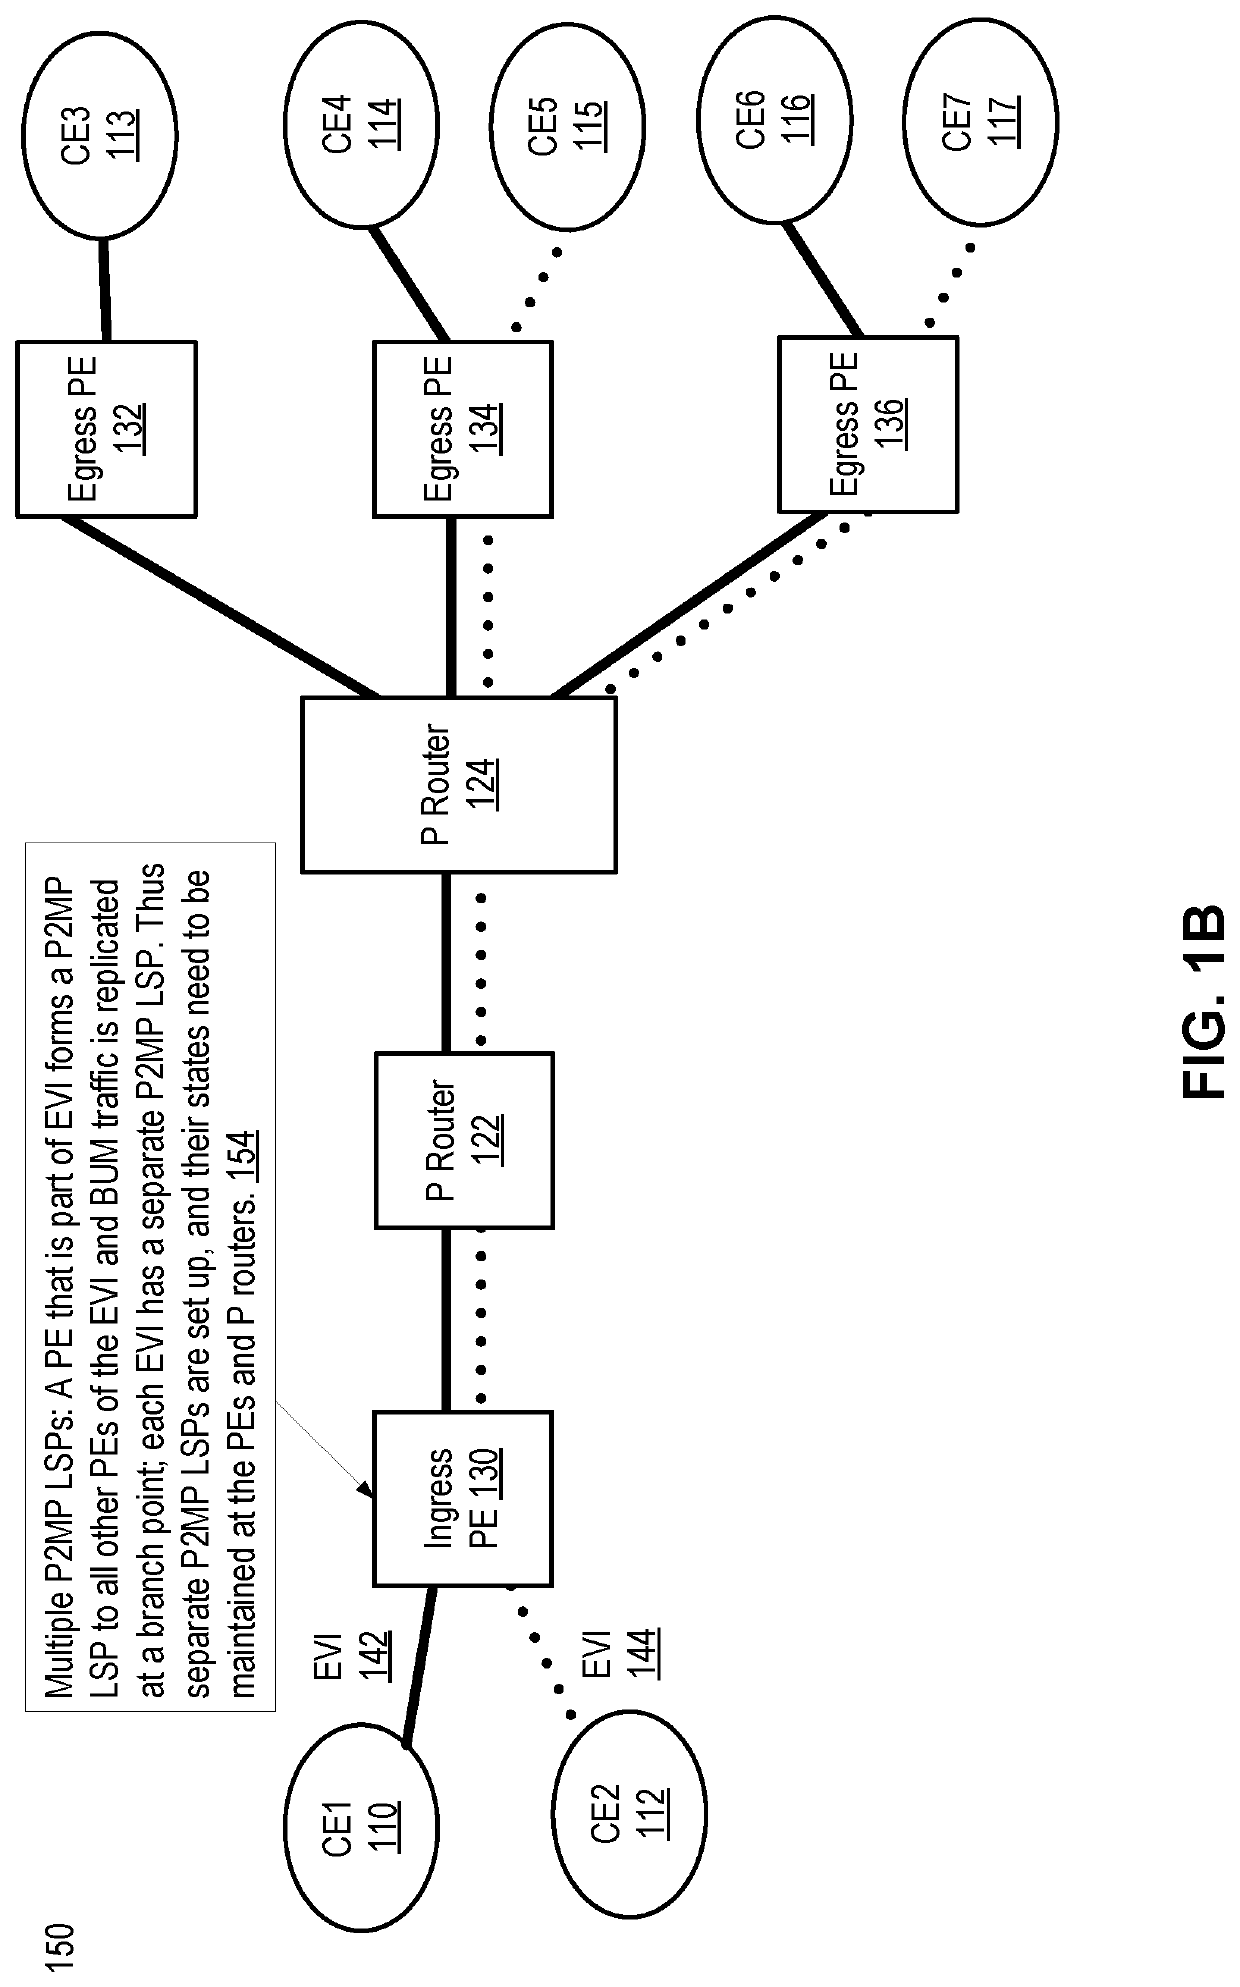 Method and system to transmit broadcast, unknown unicast, or multicast (BUM) traffic for multiple ethernet virtual private network (EVPN) instances (EVIS)